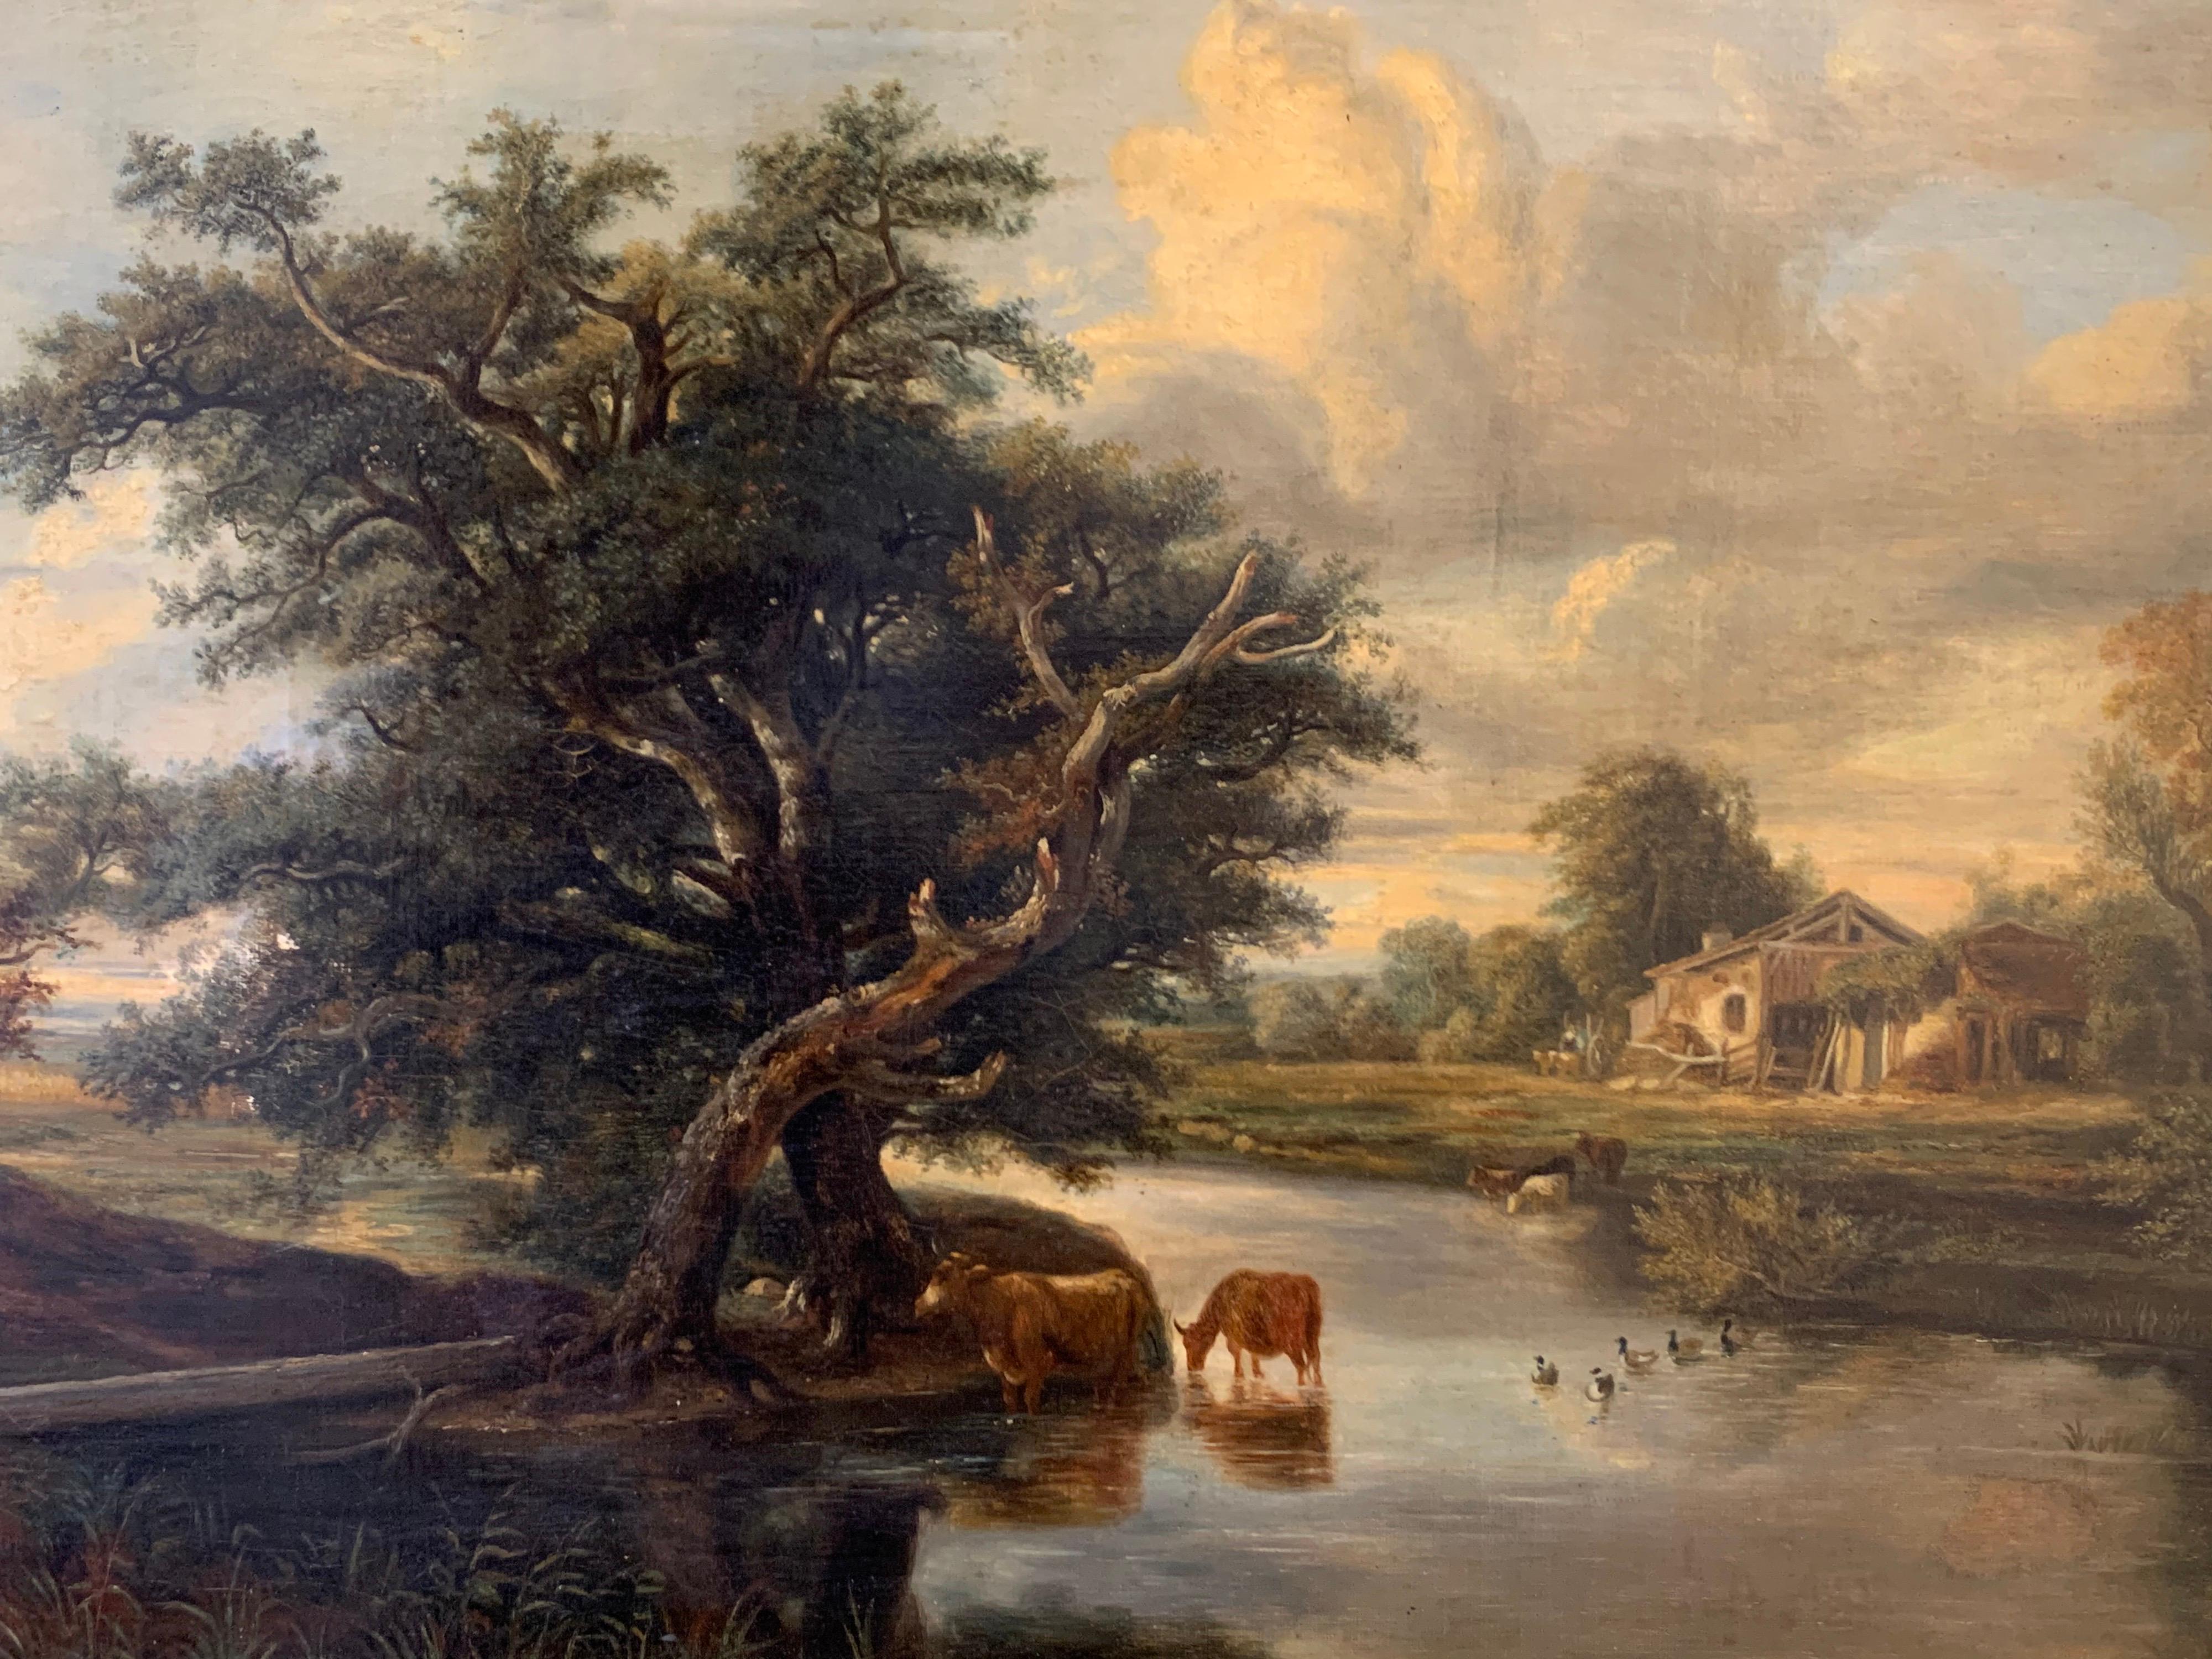 FINE 1820'S DUTCH LARGE OIL PAINTING - CATTLE WATERING RIVER LANDSCAPE AT DUSK - Victorian Painting by Dutch artist